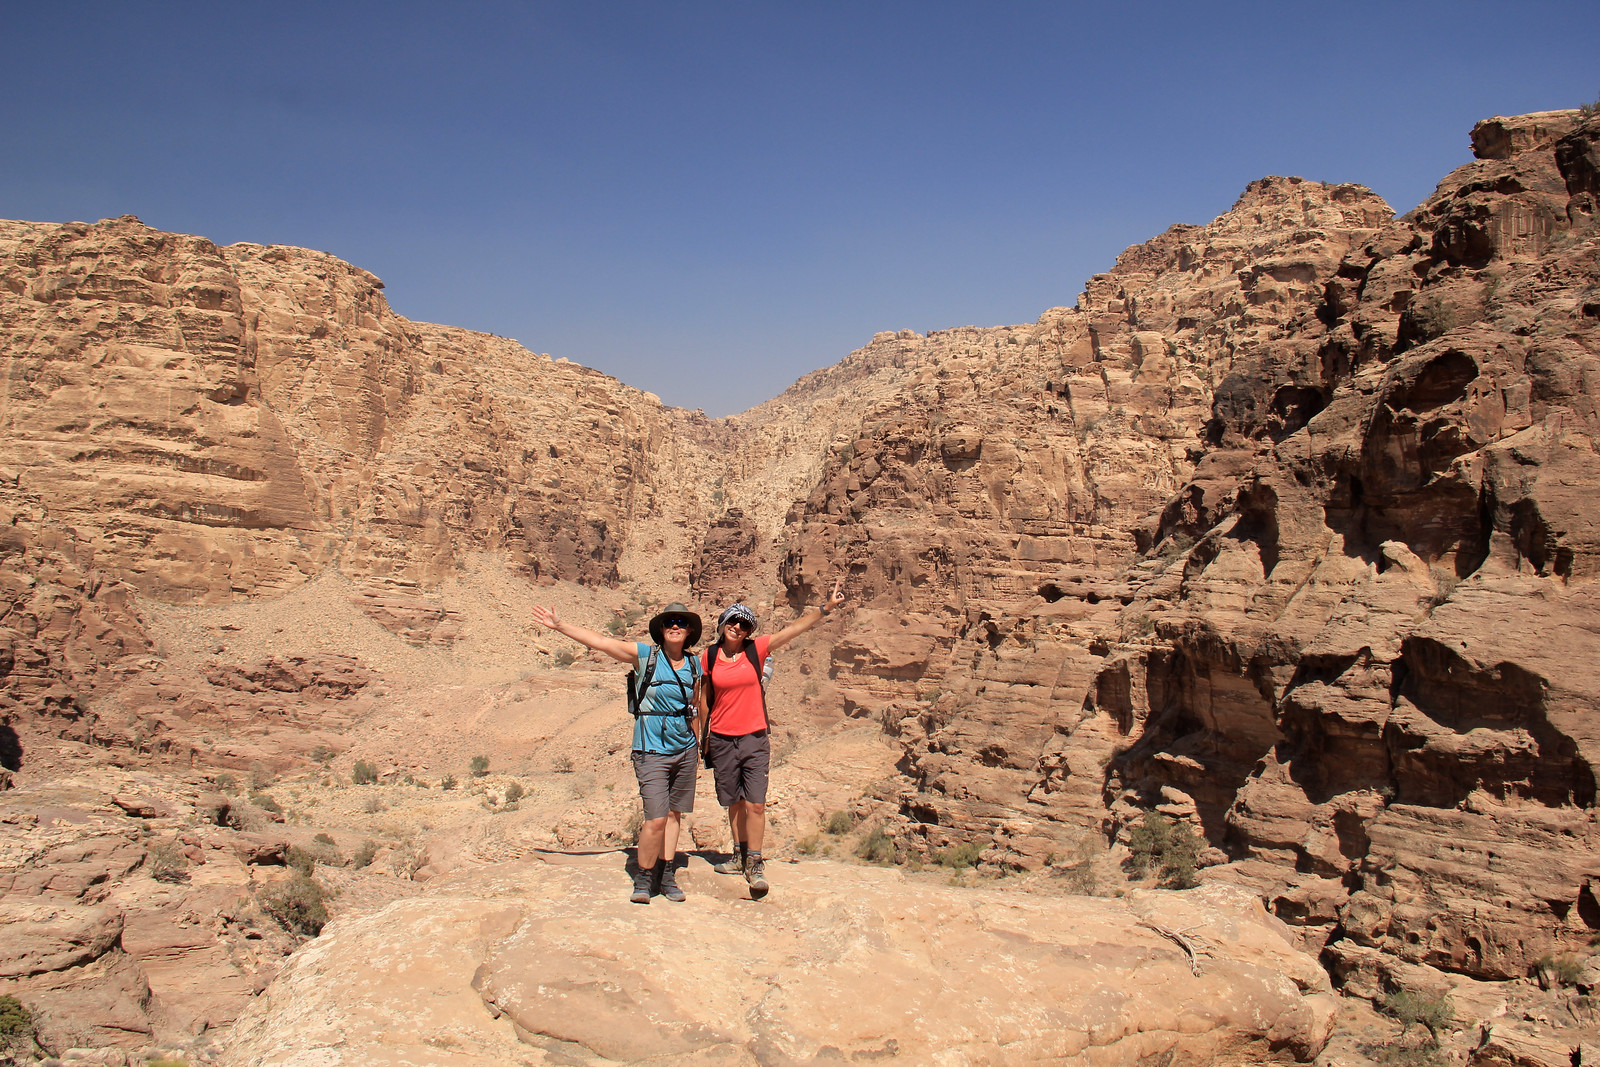 Long shorts, t-shirts and a head covering are perfect items to wear for hiking in Jordan